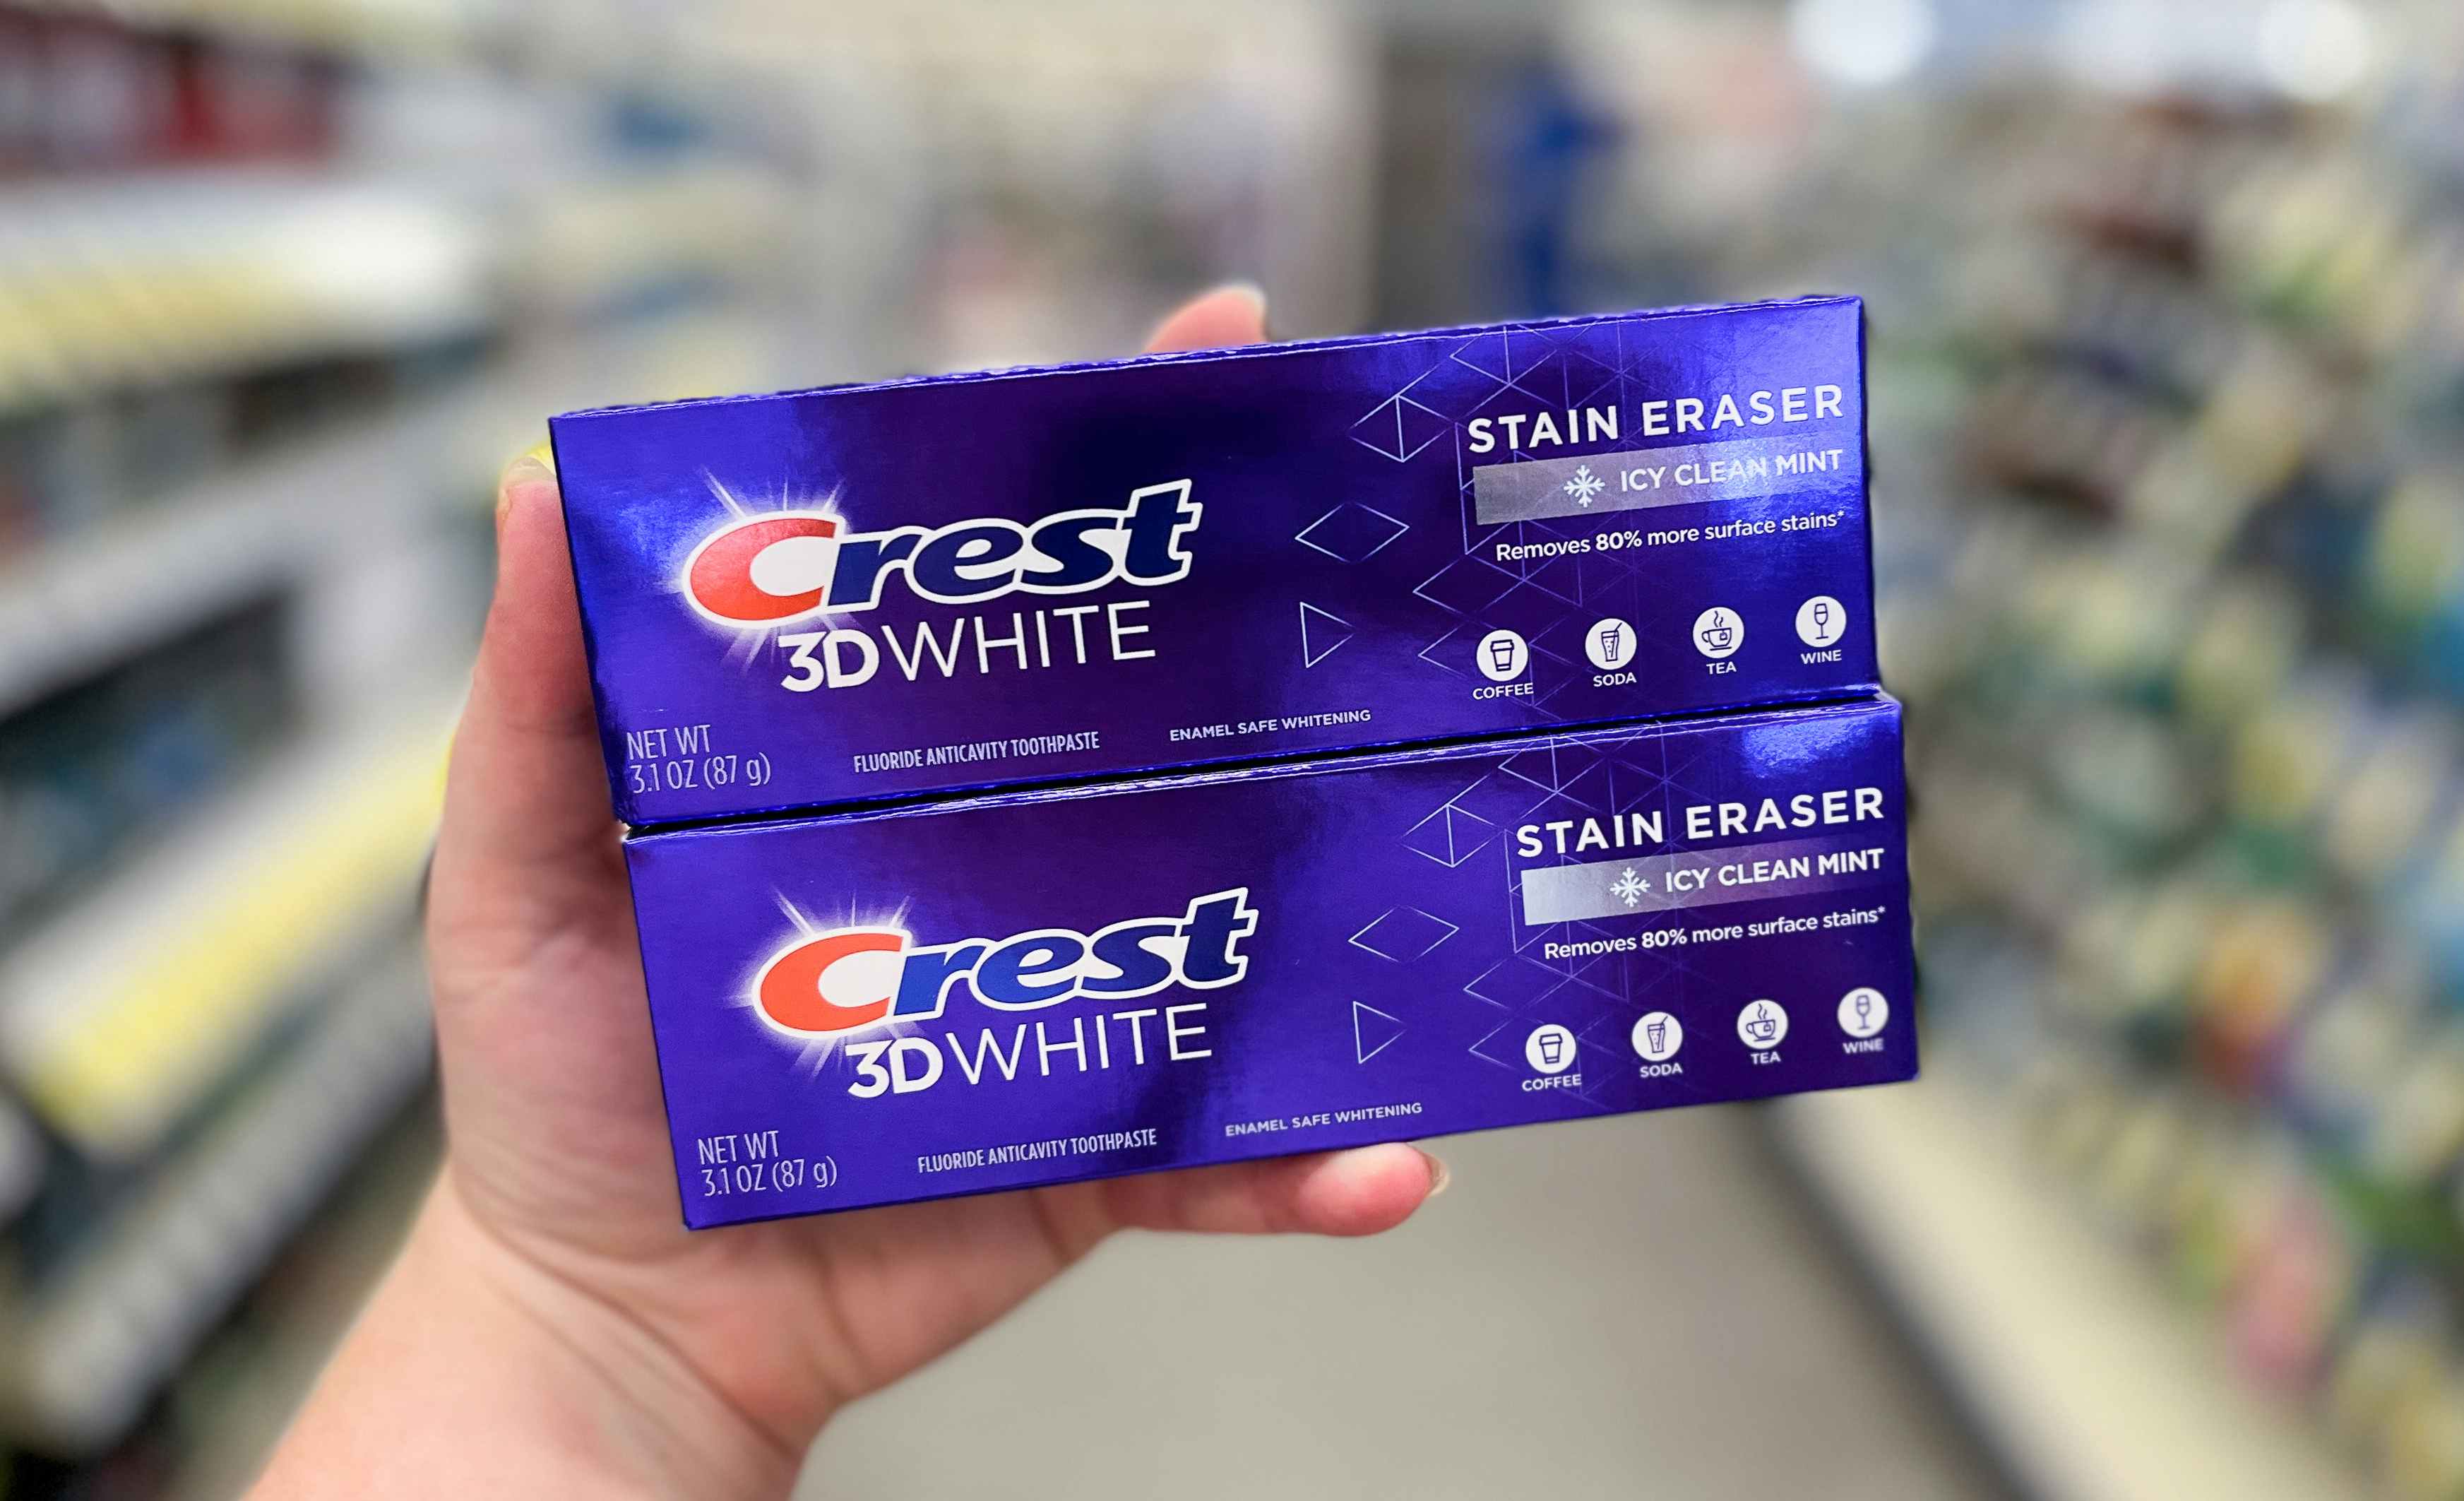 Better Than Free: Crest Toothpaste at Walgreens